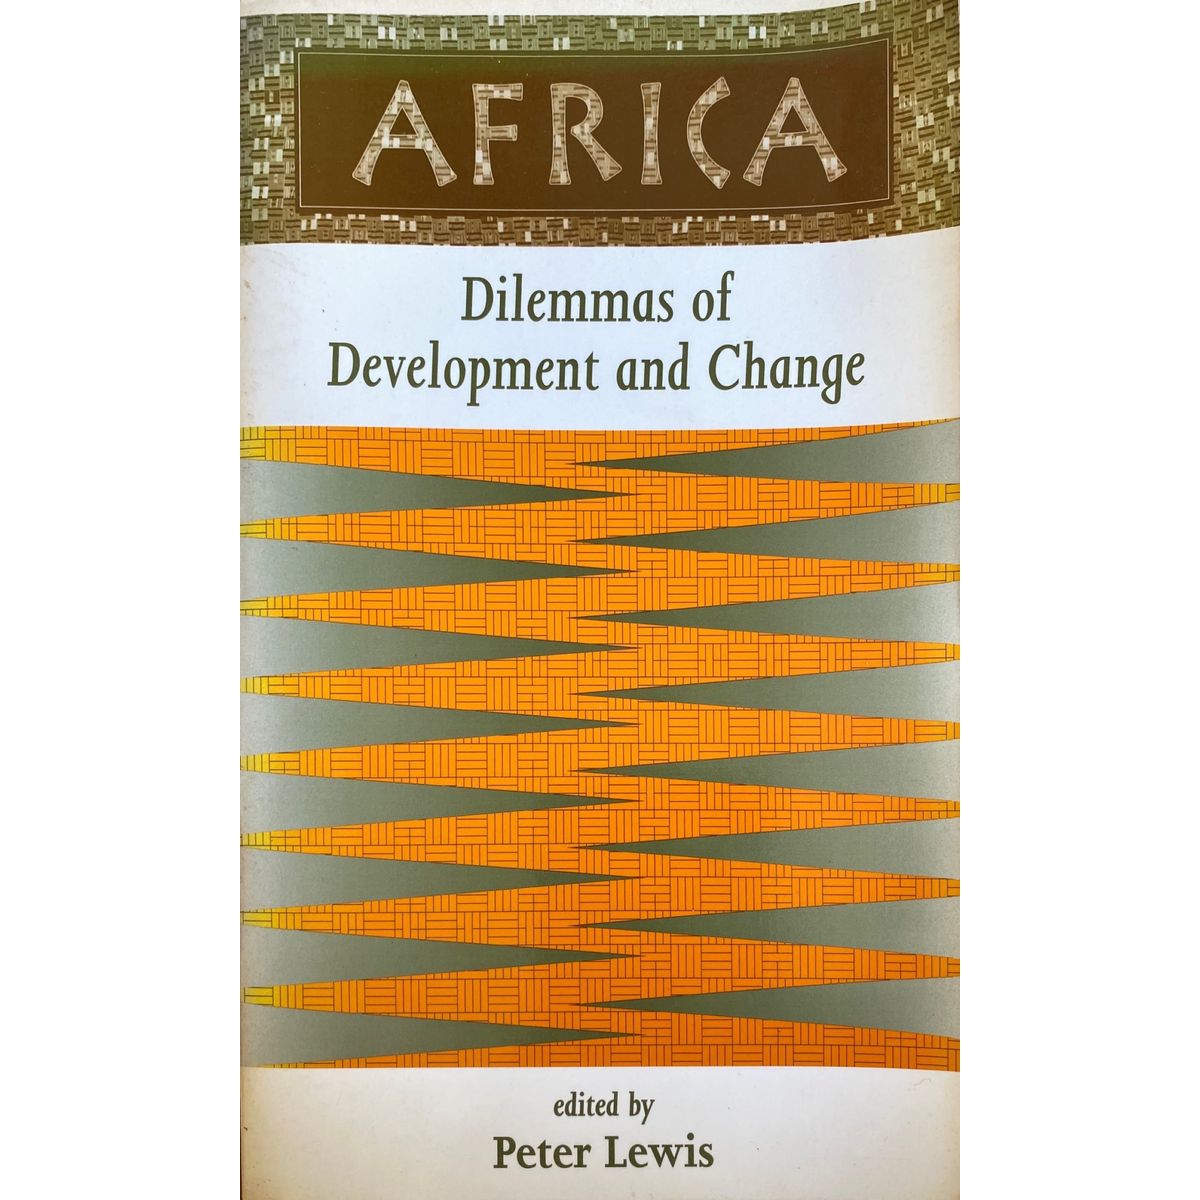 ISBN: 9780813327556 / 0813327555 - Africa: Dilemmas of Development and Change by Peter Lewis [1998]